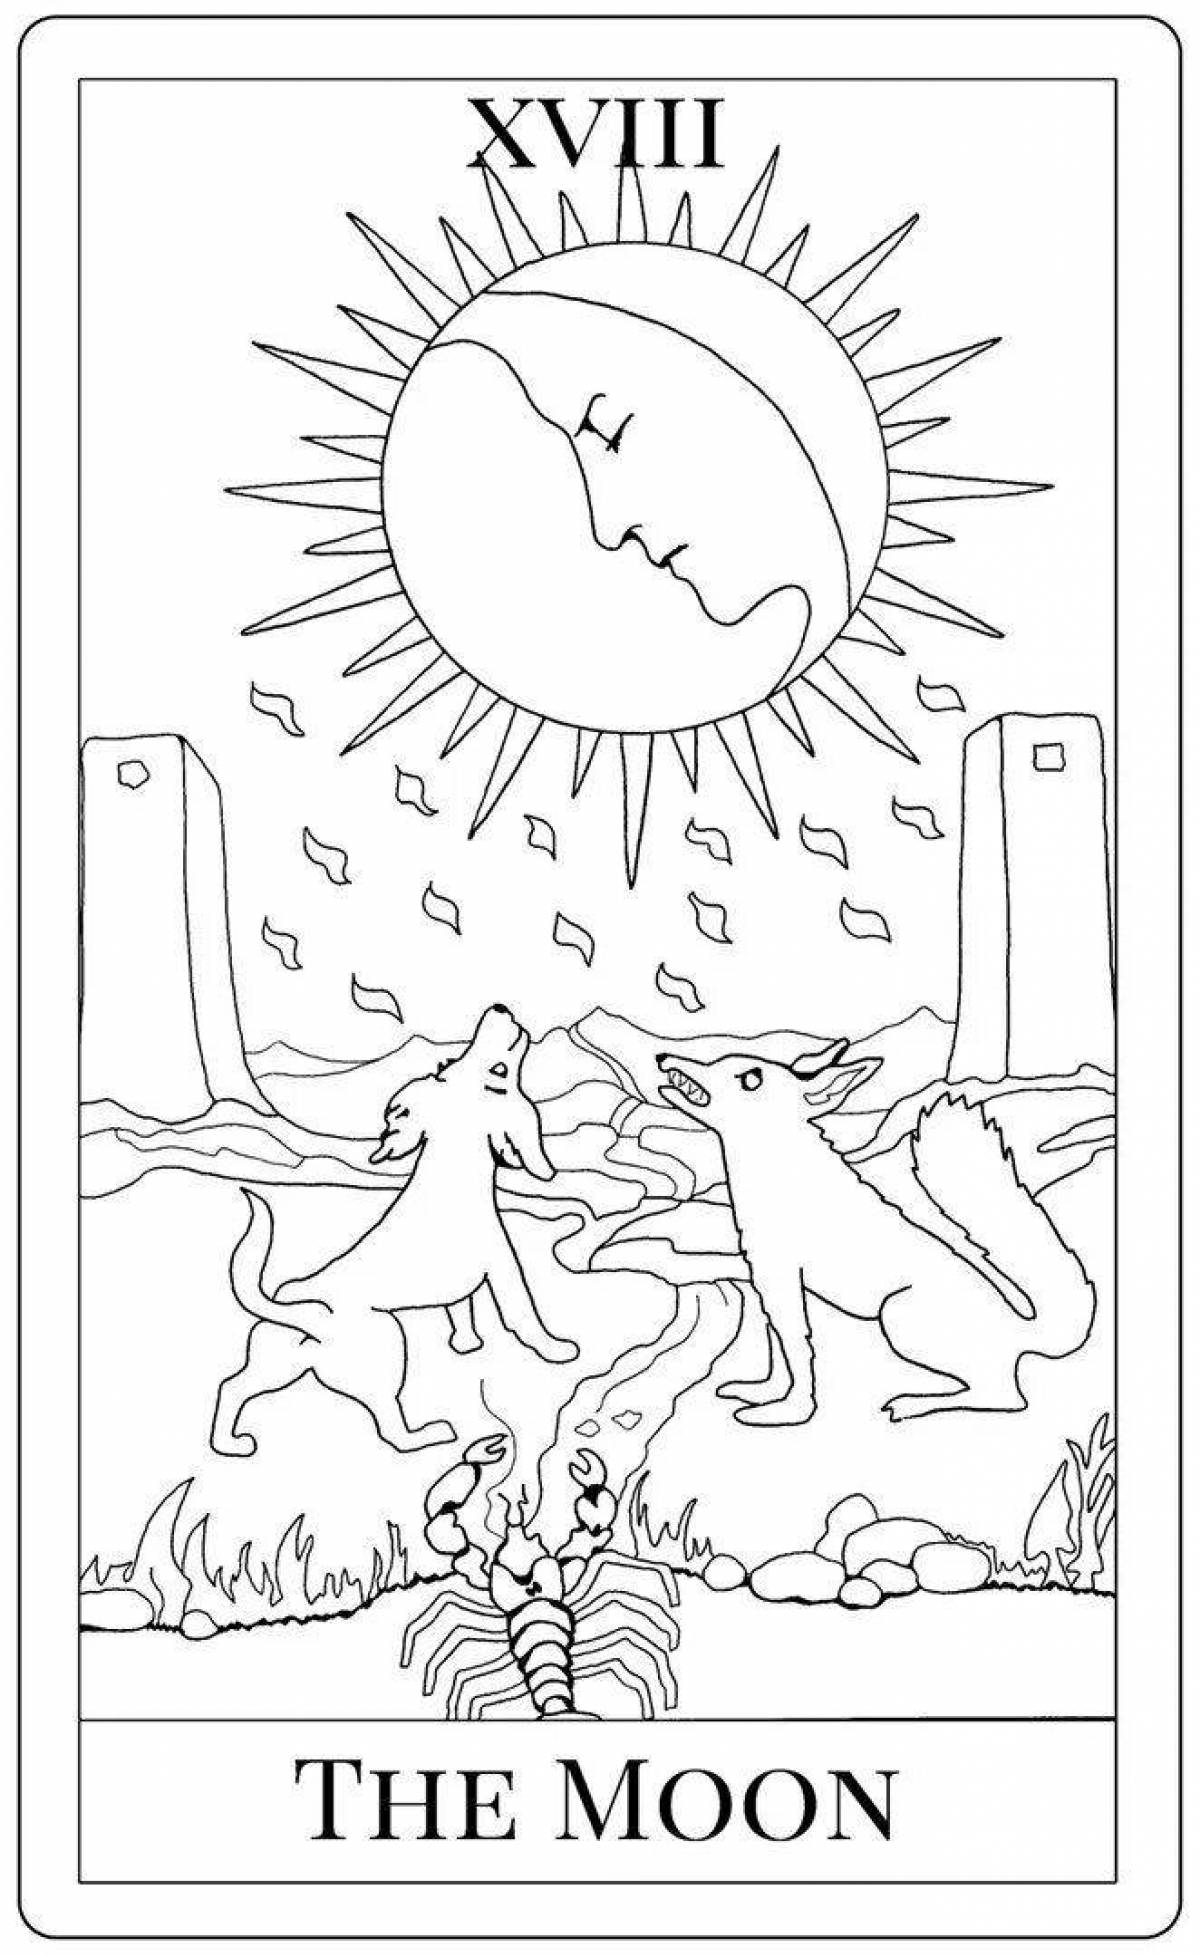 Waite's vibrant tarot coloring page